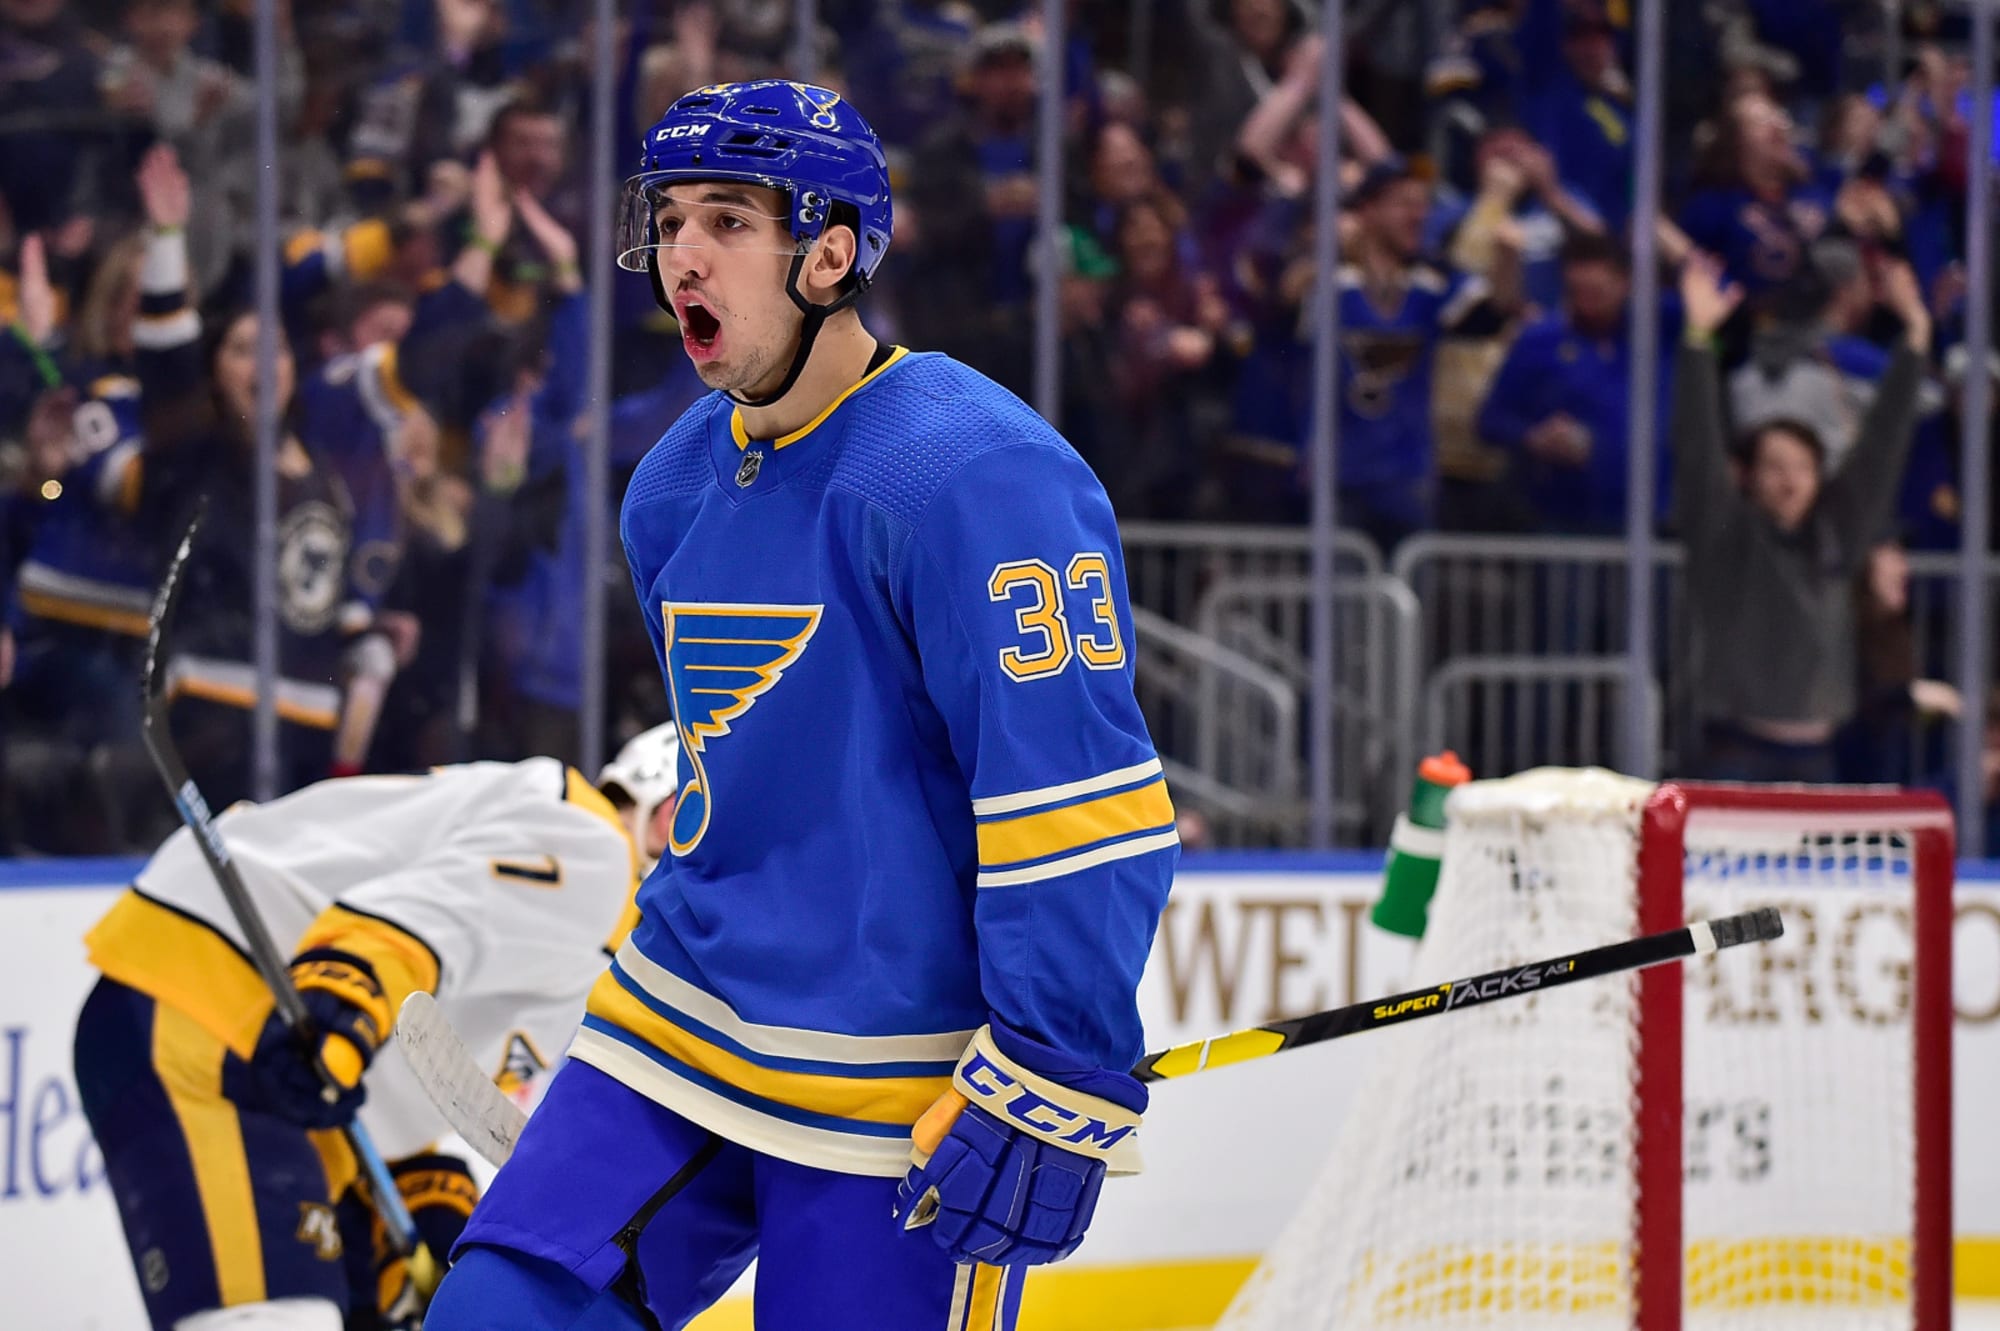 The St. Louis Blues are counting on motivated players to help them